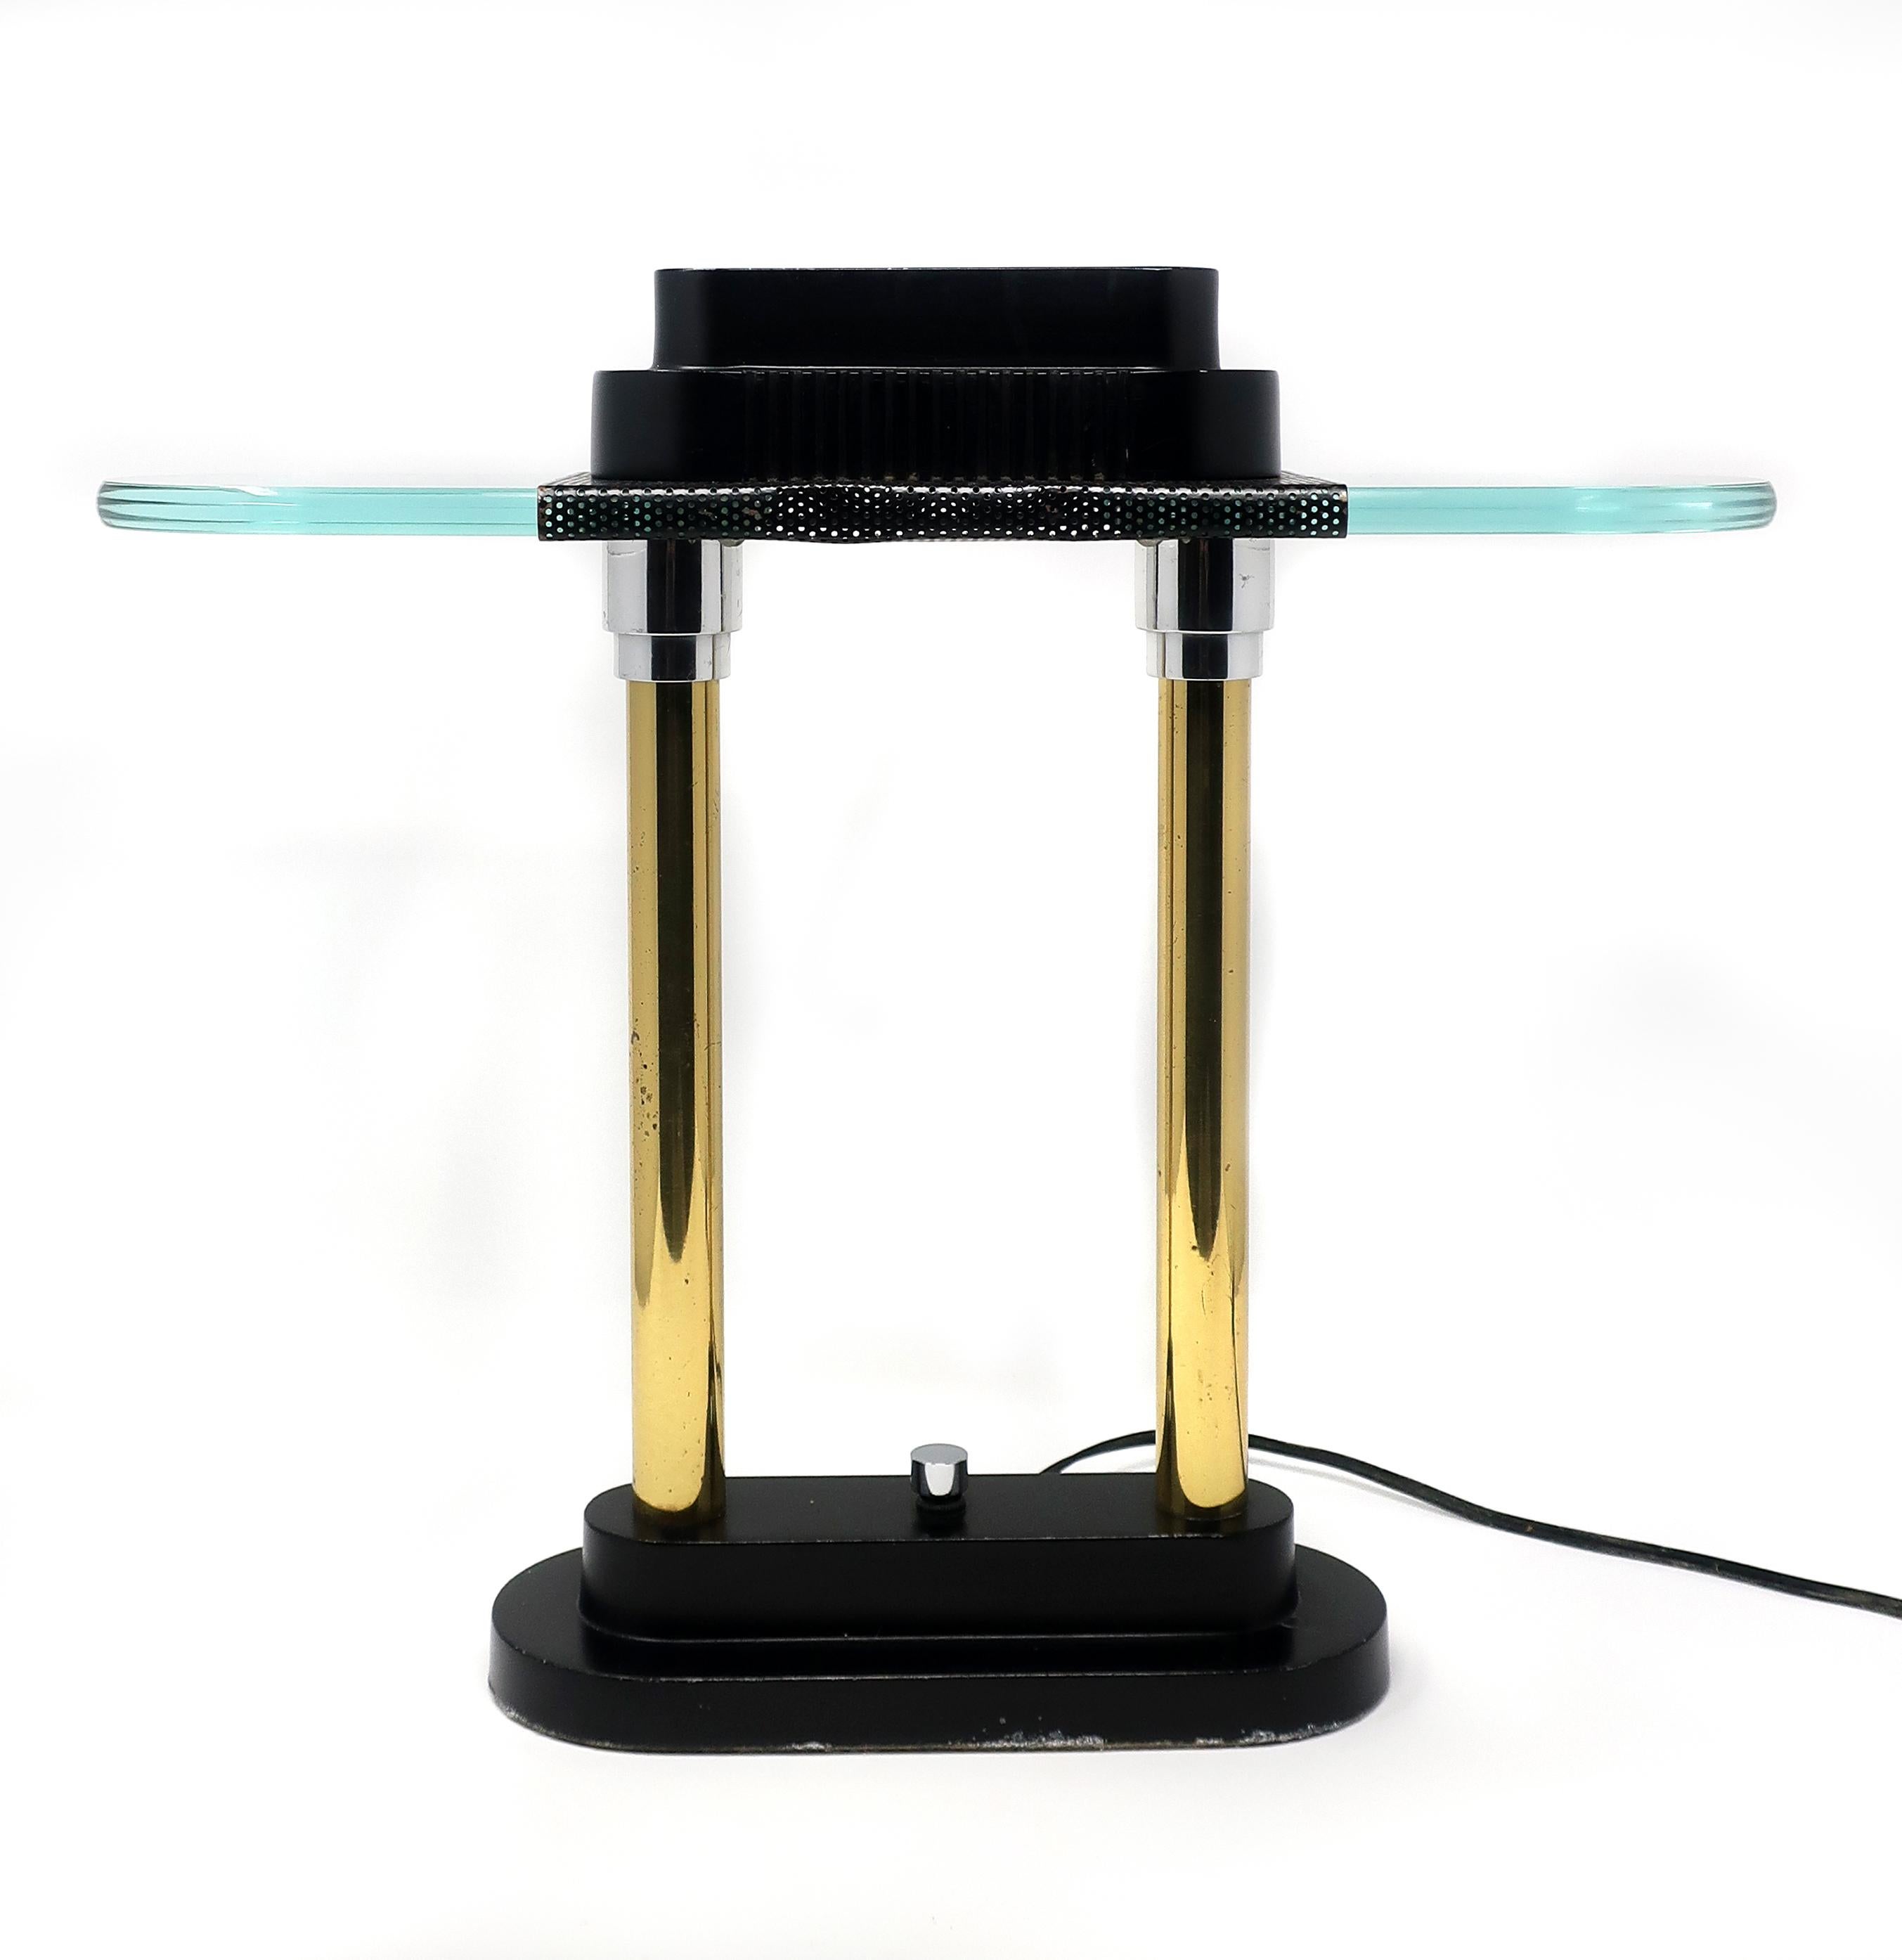 A pair of Memphis-inspired, Postmodern 1980s Robert Sonneman for George Kovacs table or desk lamps. Each lamp has two brass cloumns on a very heavy matte black base with chrome accents. The shade is designed with green glass to evoke Classic